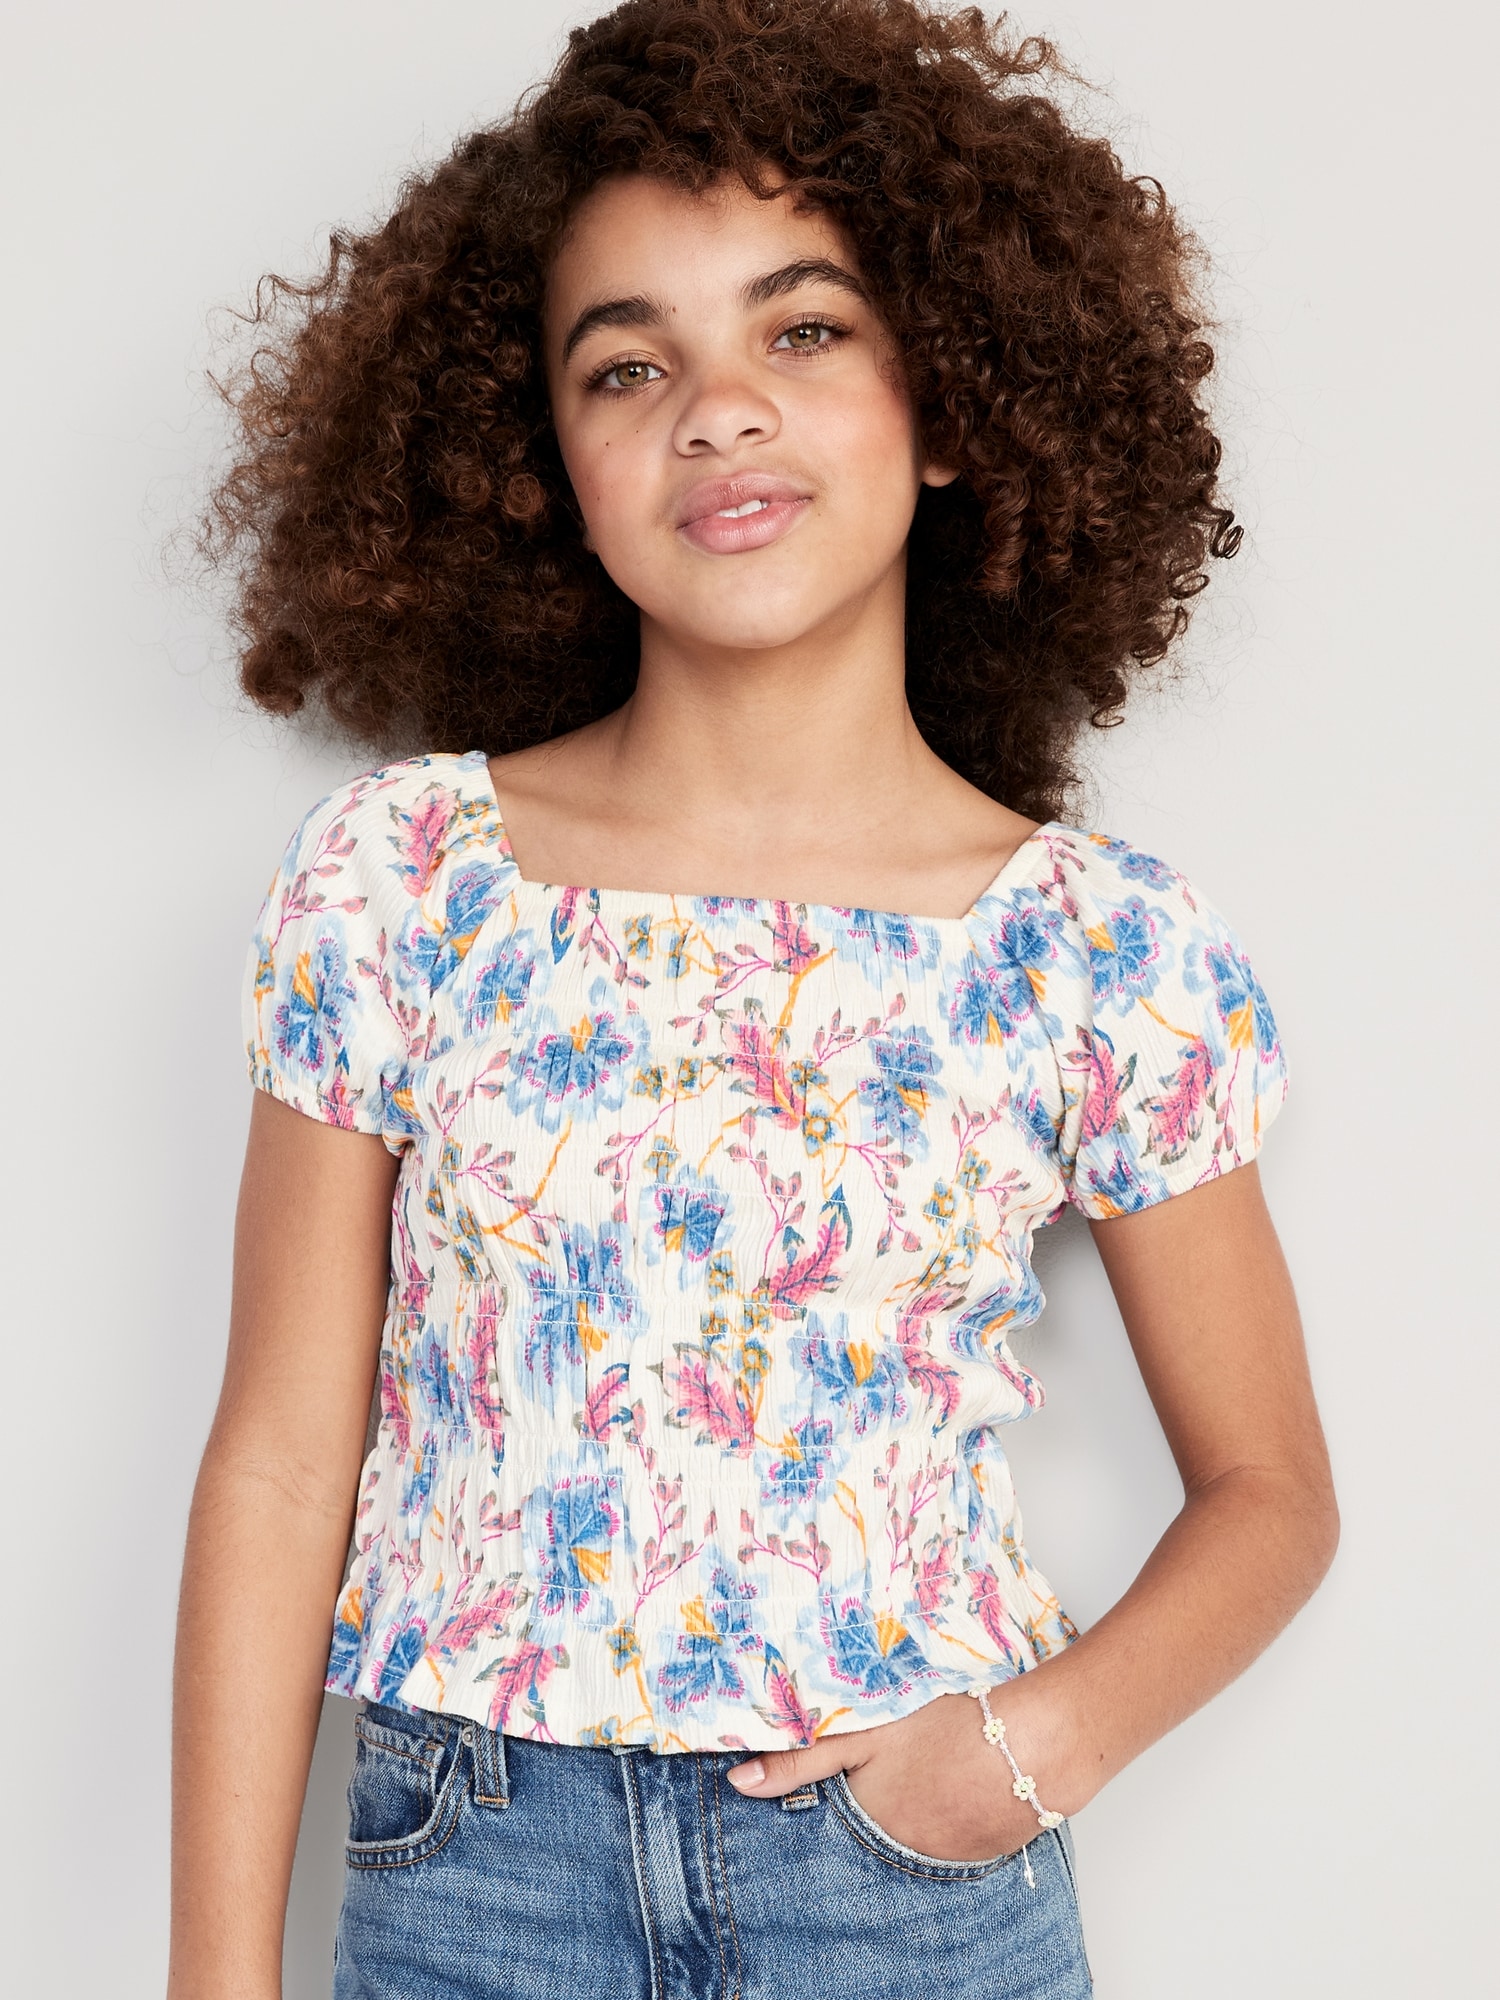 Old Navy - Printed Puckered-Jacquard Knit Smocked Top for Girls multi